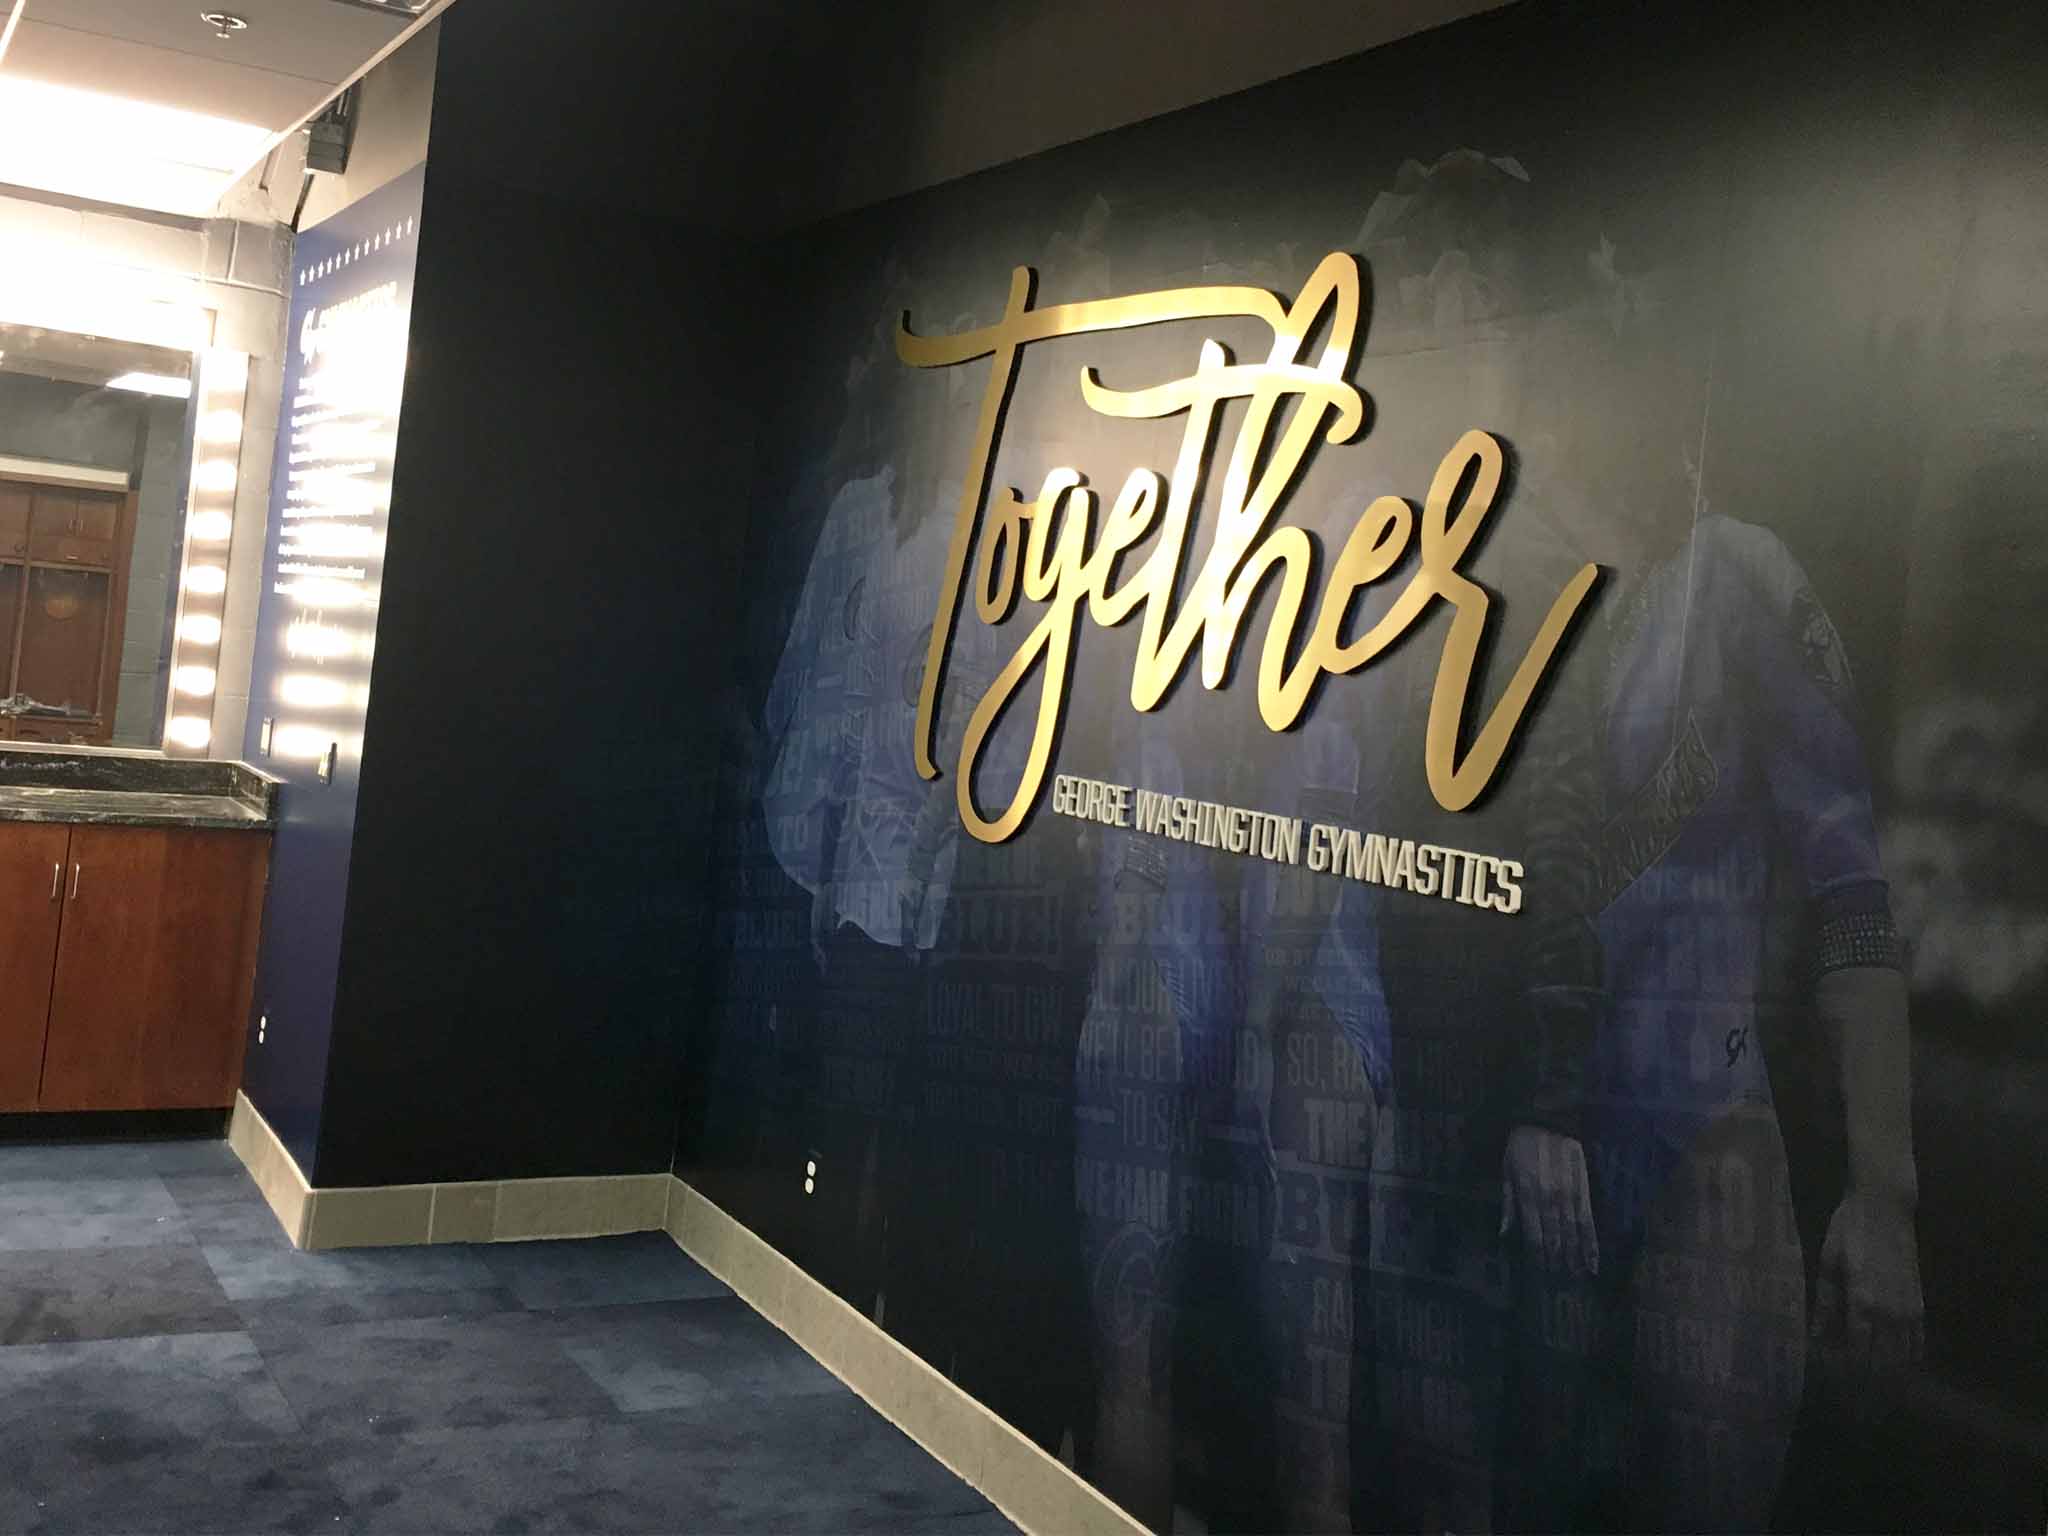 George Washington University wall graphics and lettering